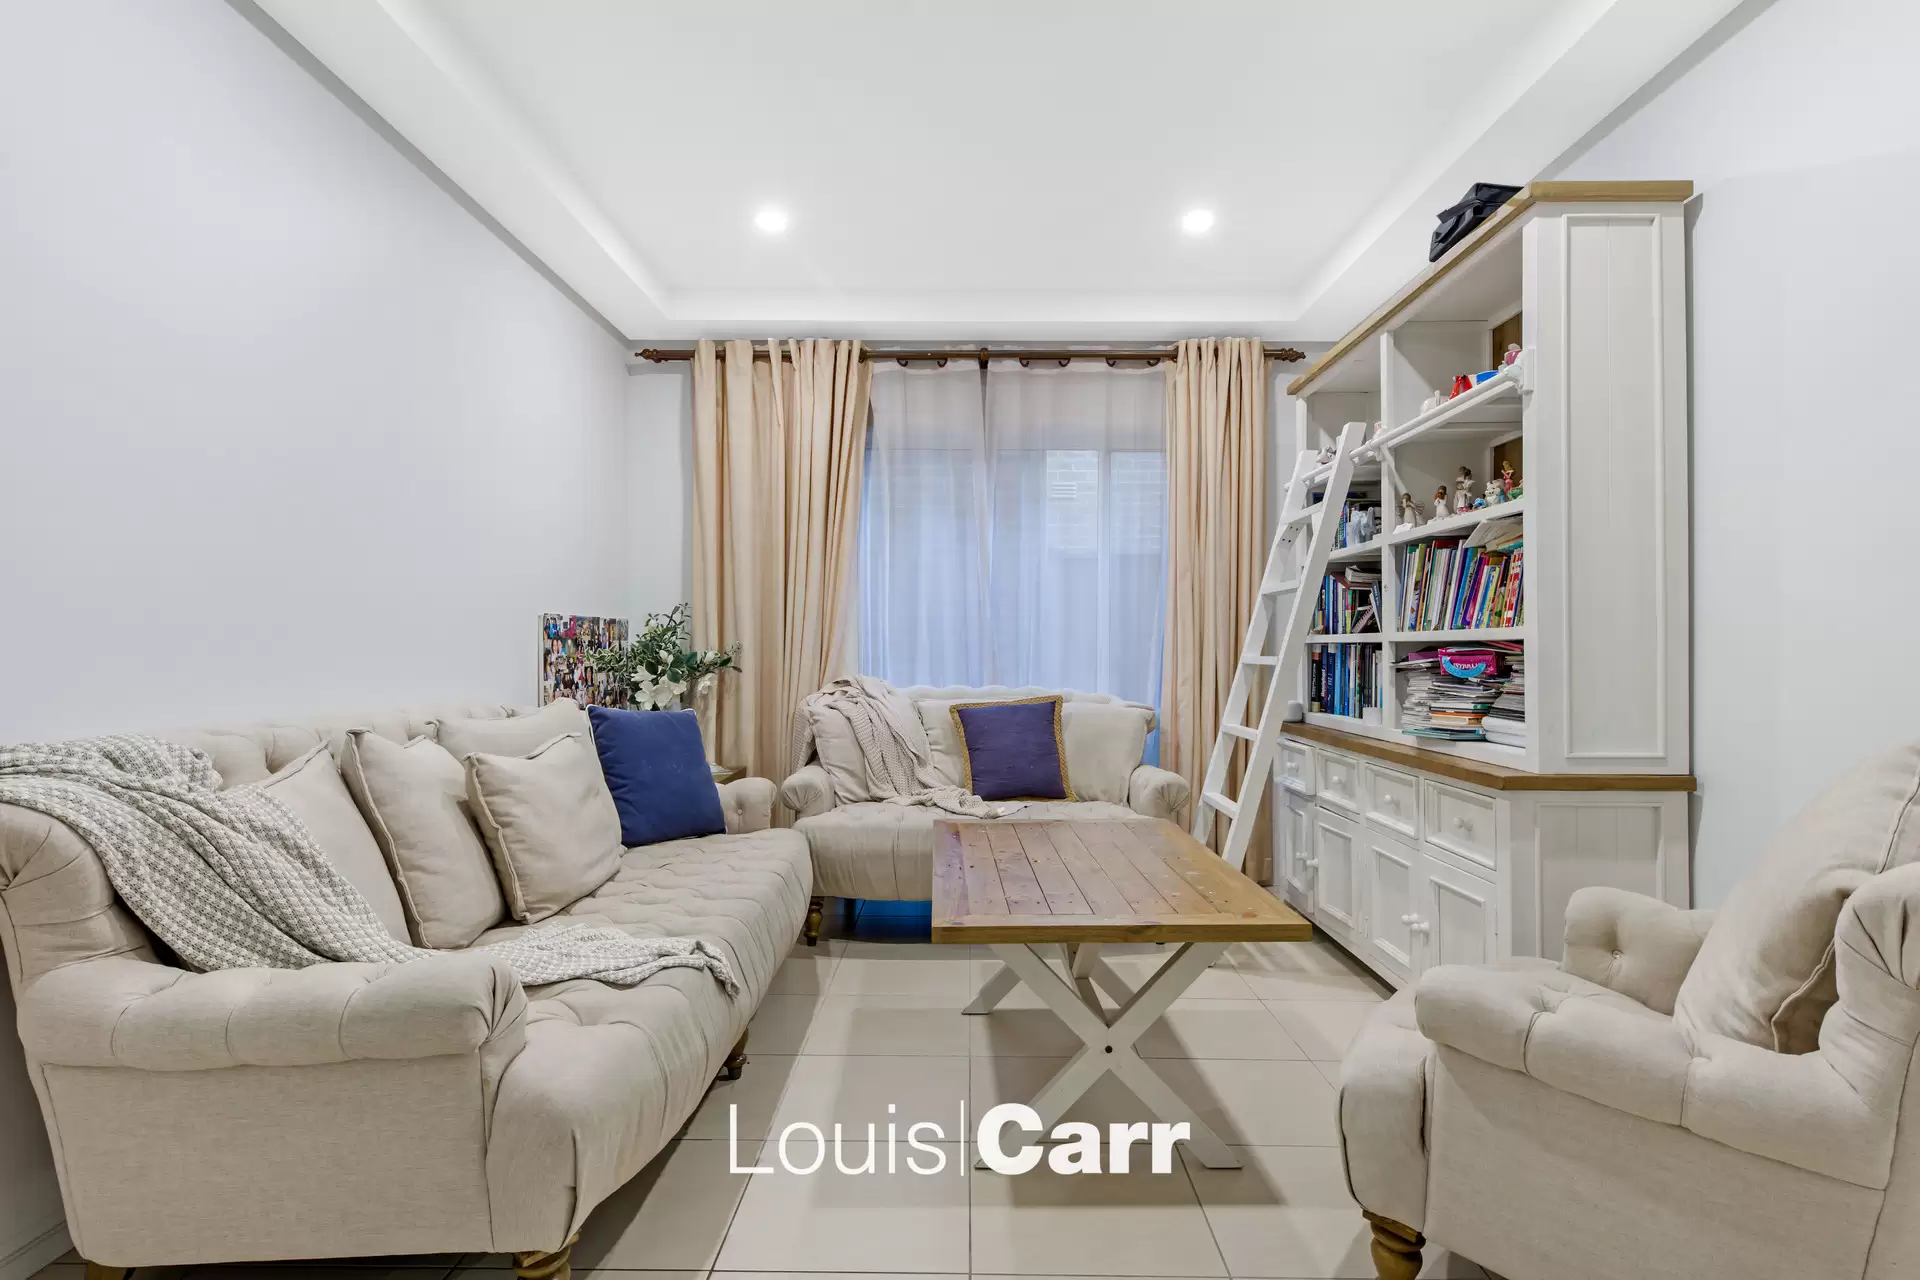 Photo #6: 9 Freshwater Road, Rouse Hill - For Sale by Louis Carr Real Estate